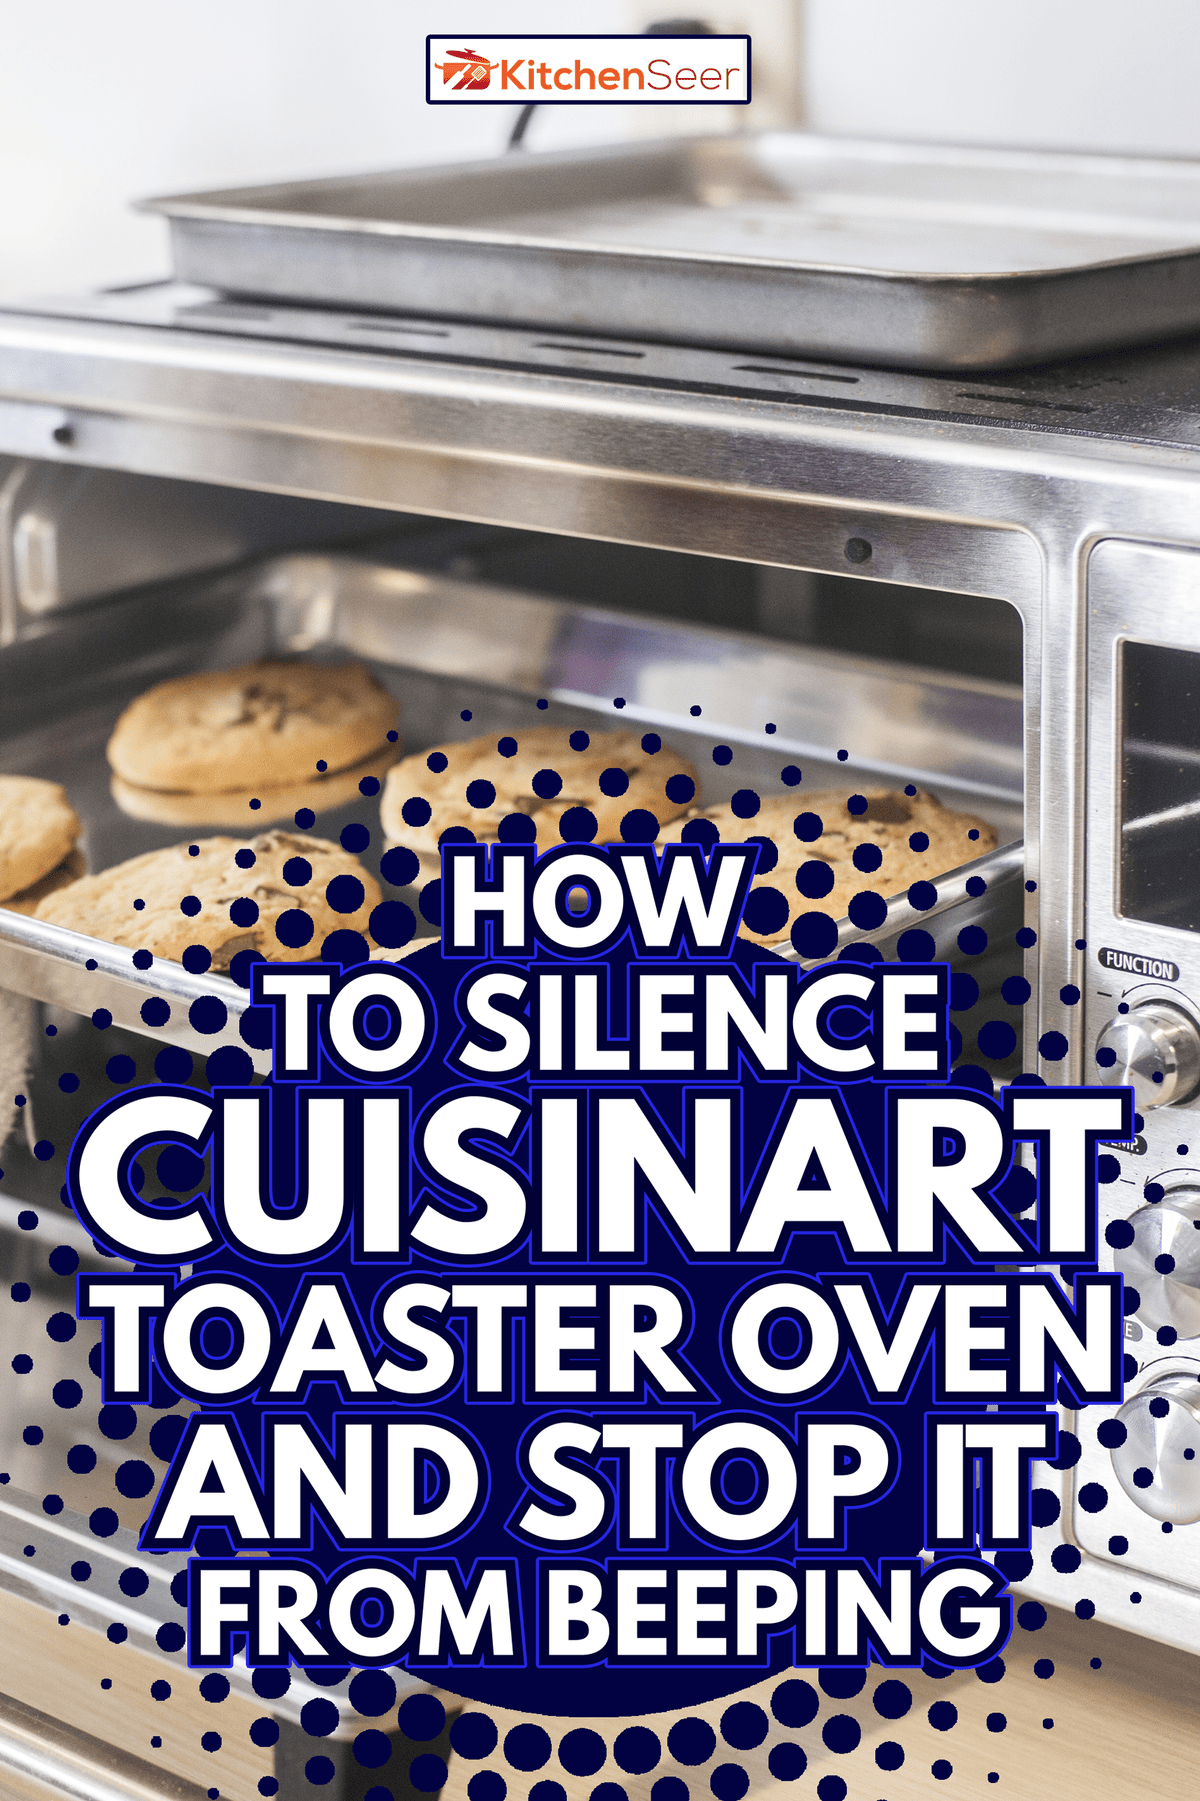 A female hand using a towel to remove a small baking sheet full of chocolate chip cookies from a silver toaster oven. The scene is a brightly lit modern kitchen counter. - How To Silence Cuisinart Toaster Oven And Stop It From Beeping